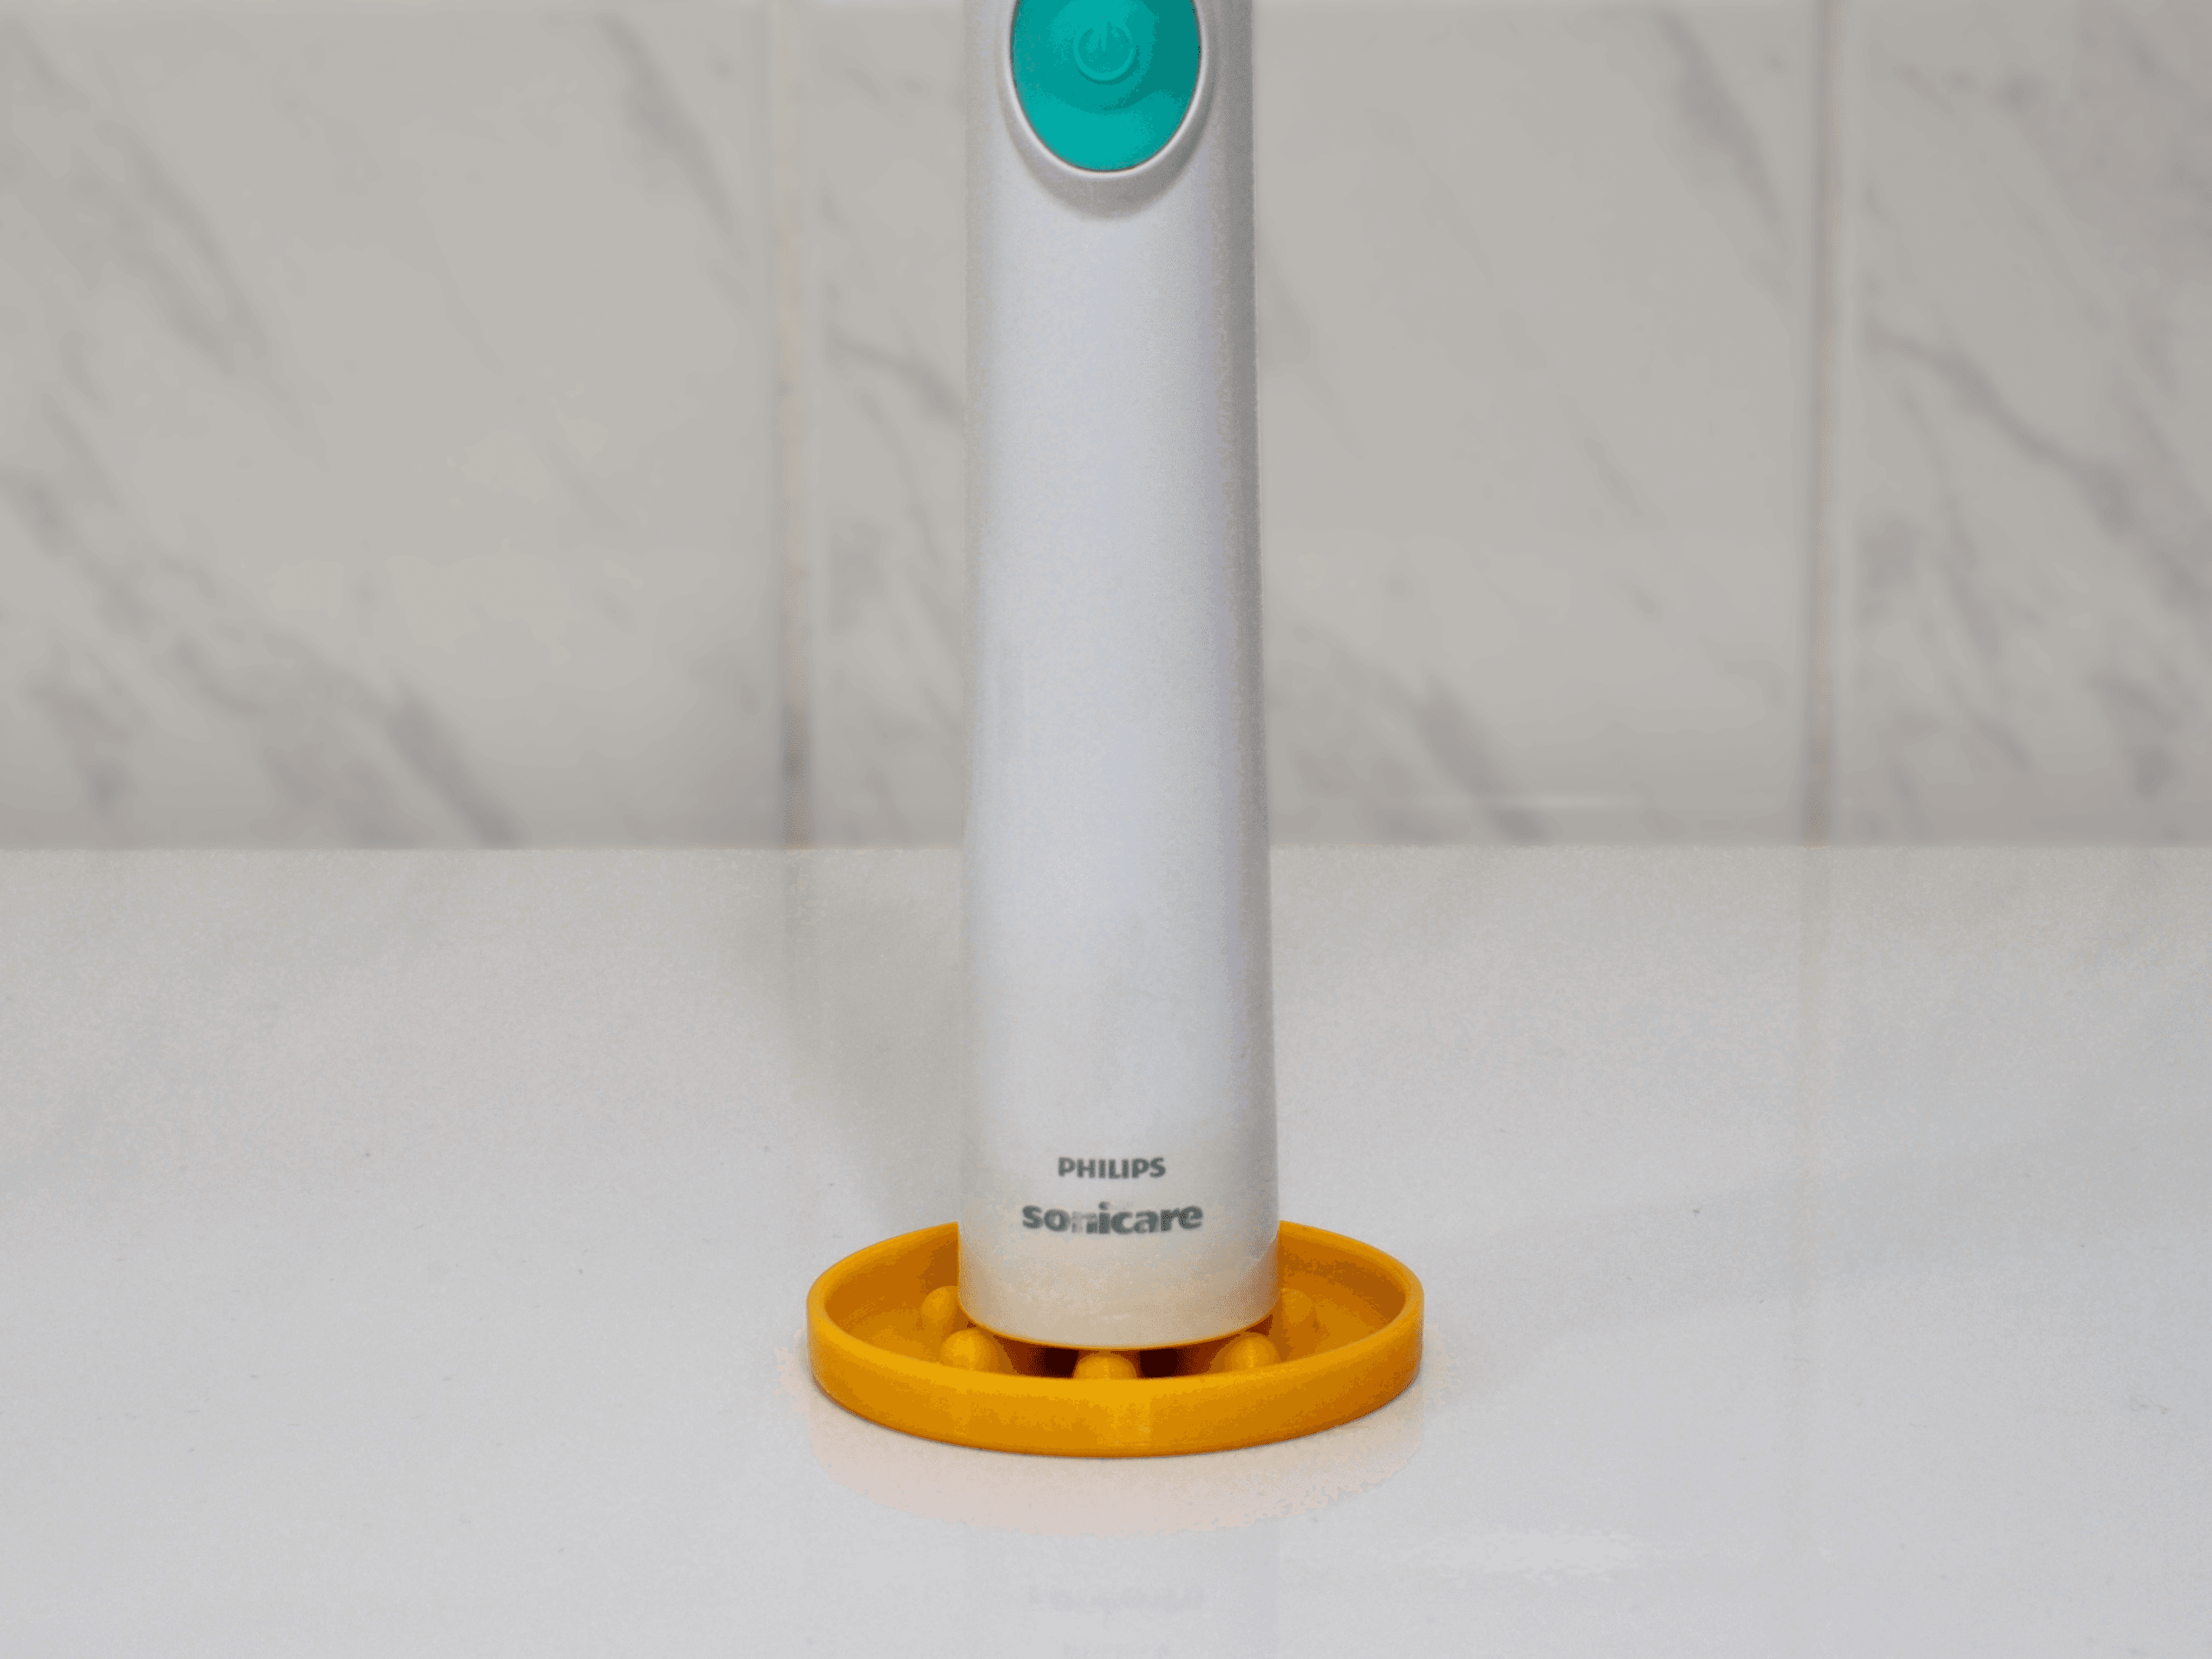 Sonicare Stand 3d model